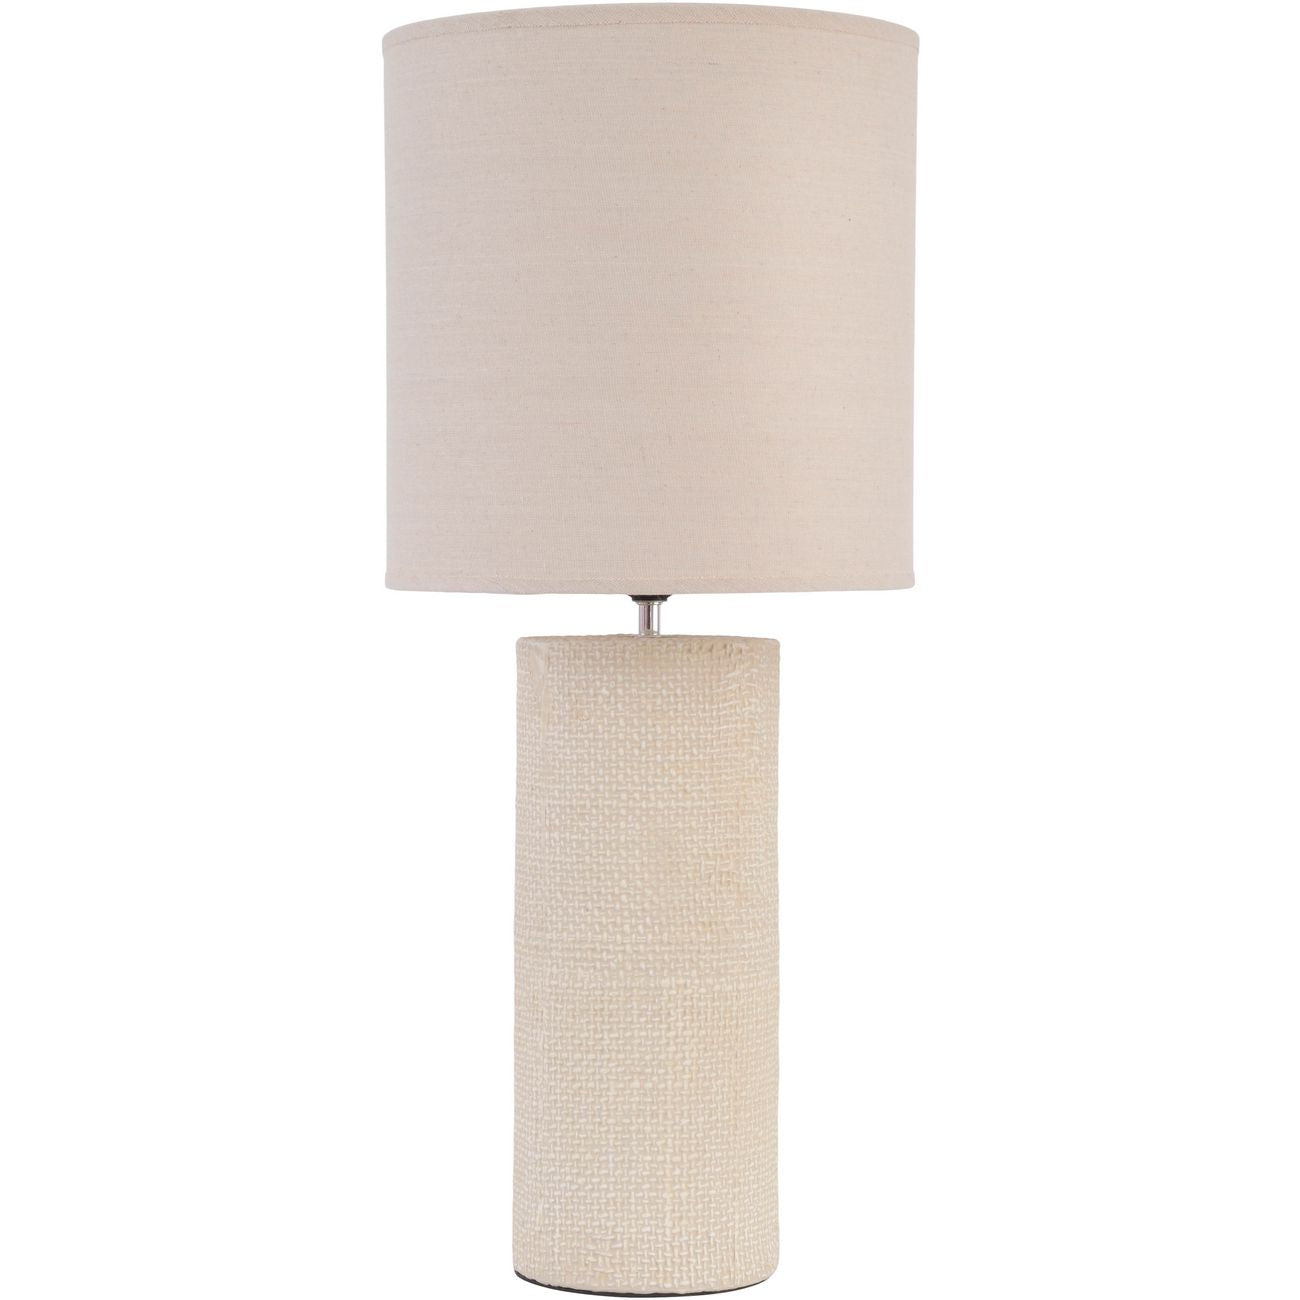 Libra Tall Textured Porcelain Table Lamp With Shade Cream | Outlet